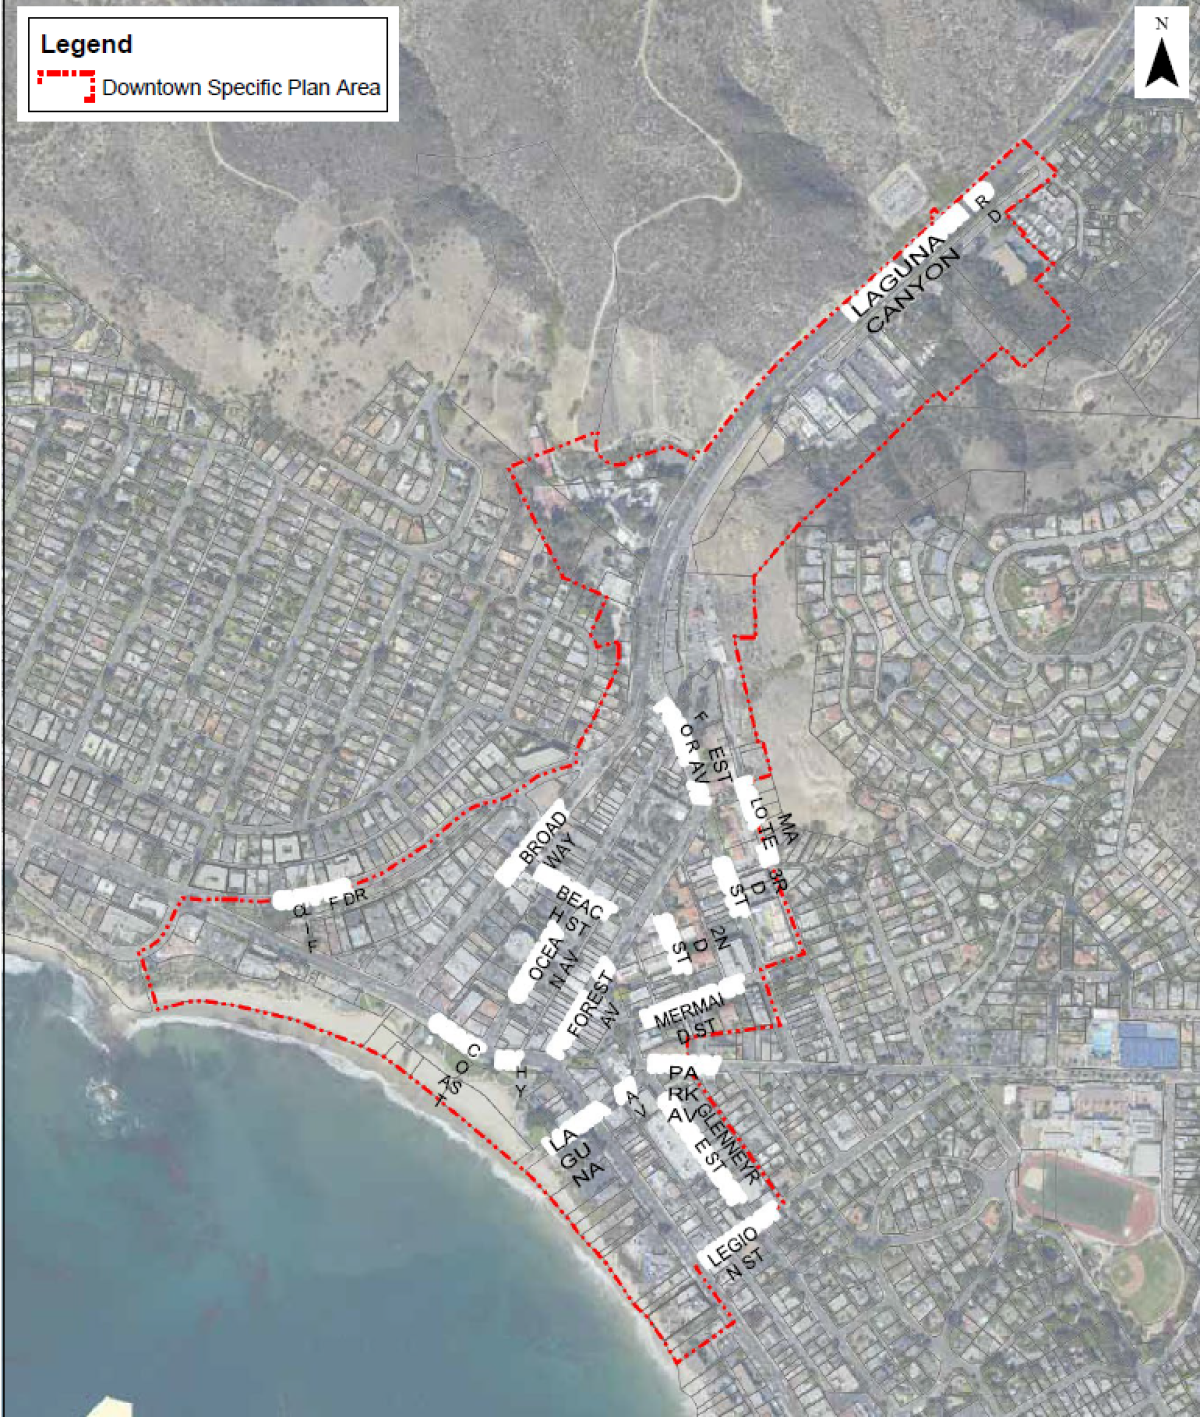 Outlined is the perimeter of what the Downtown Specific Plan impacts in Laguna Beach.